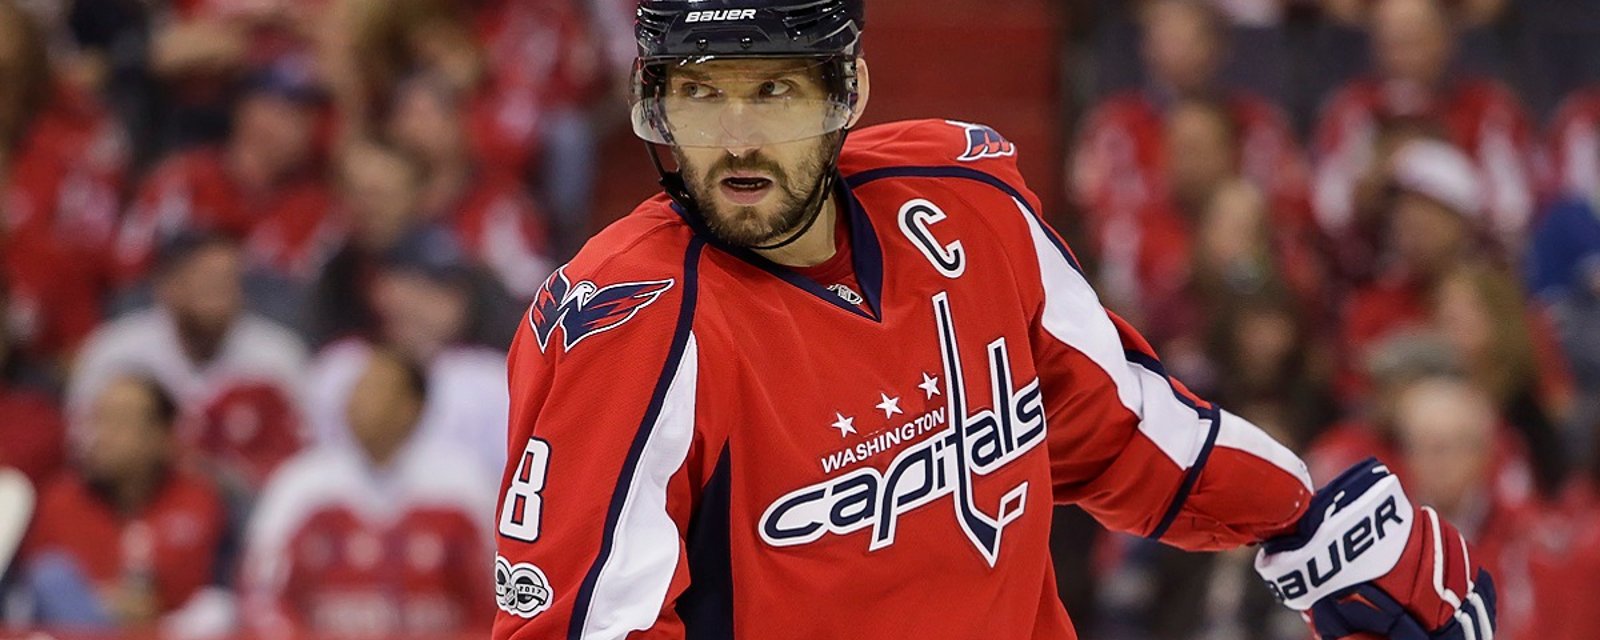 Breaking: Capitals coach Barry Trotz appears to throw Ovechkin under the bus.